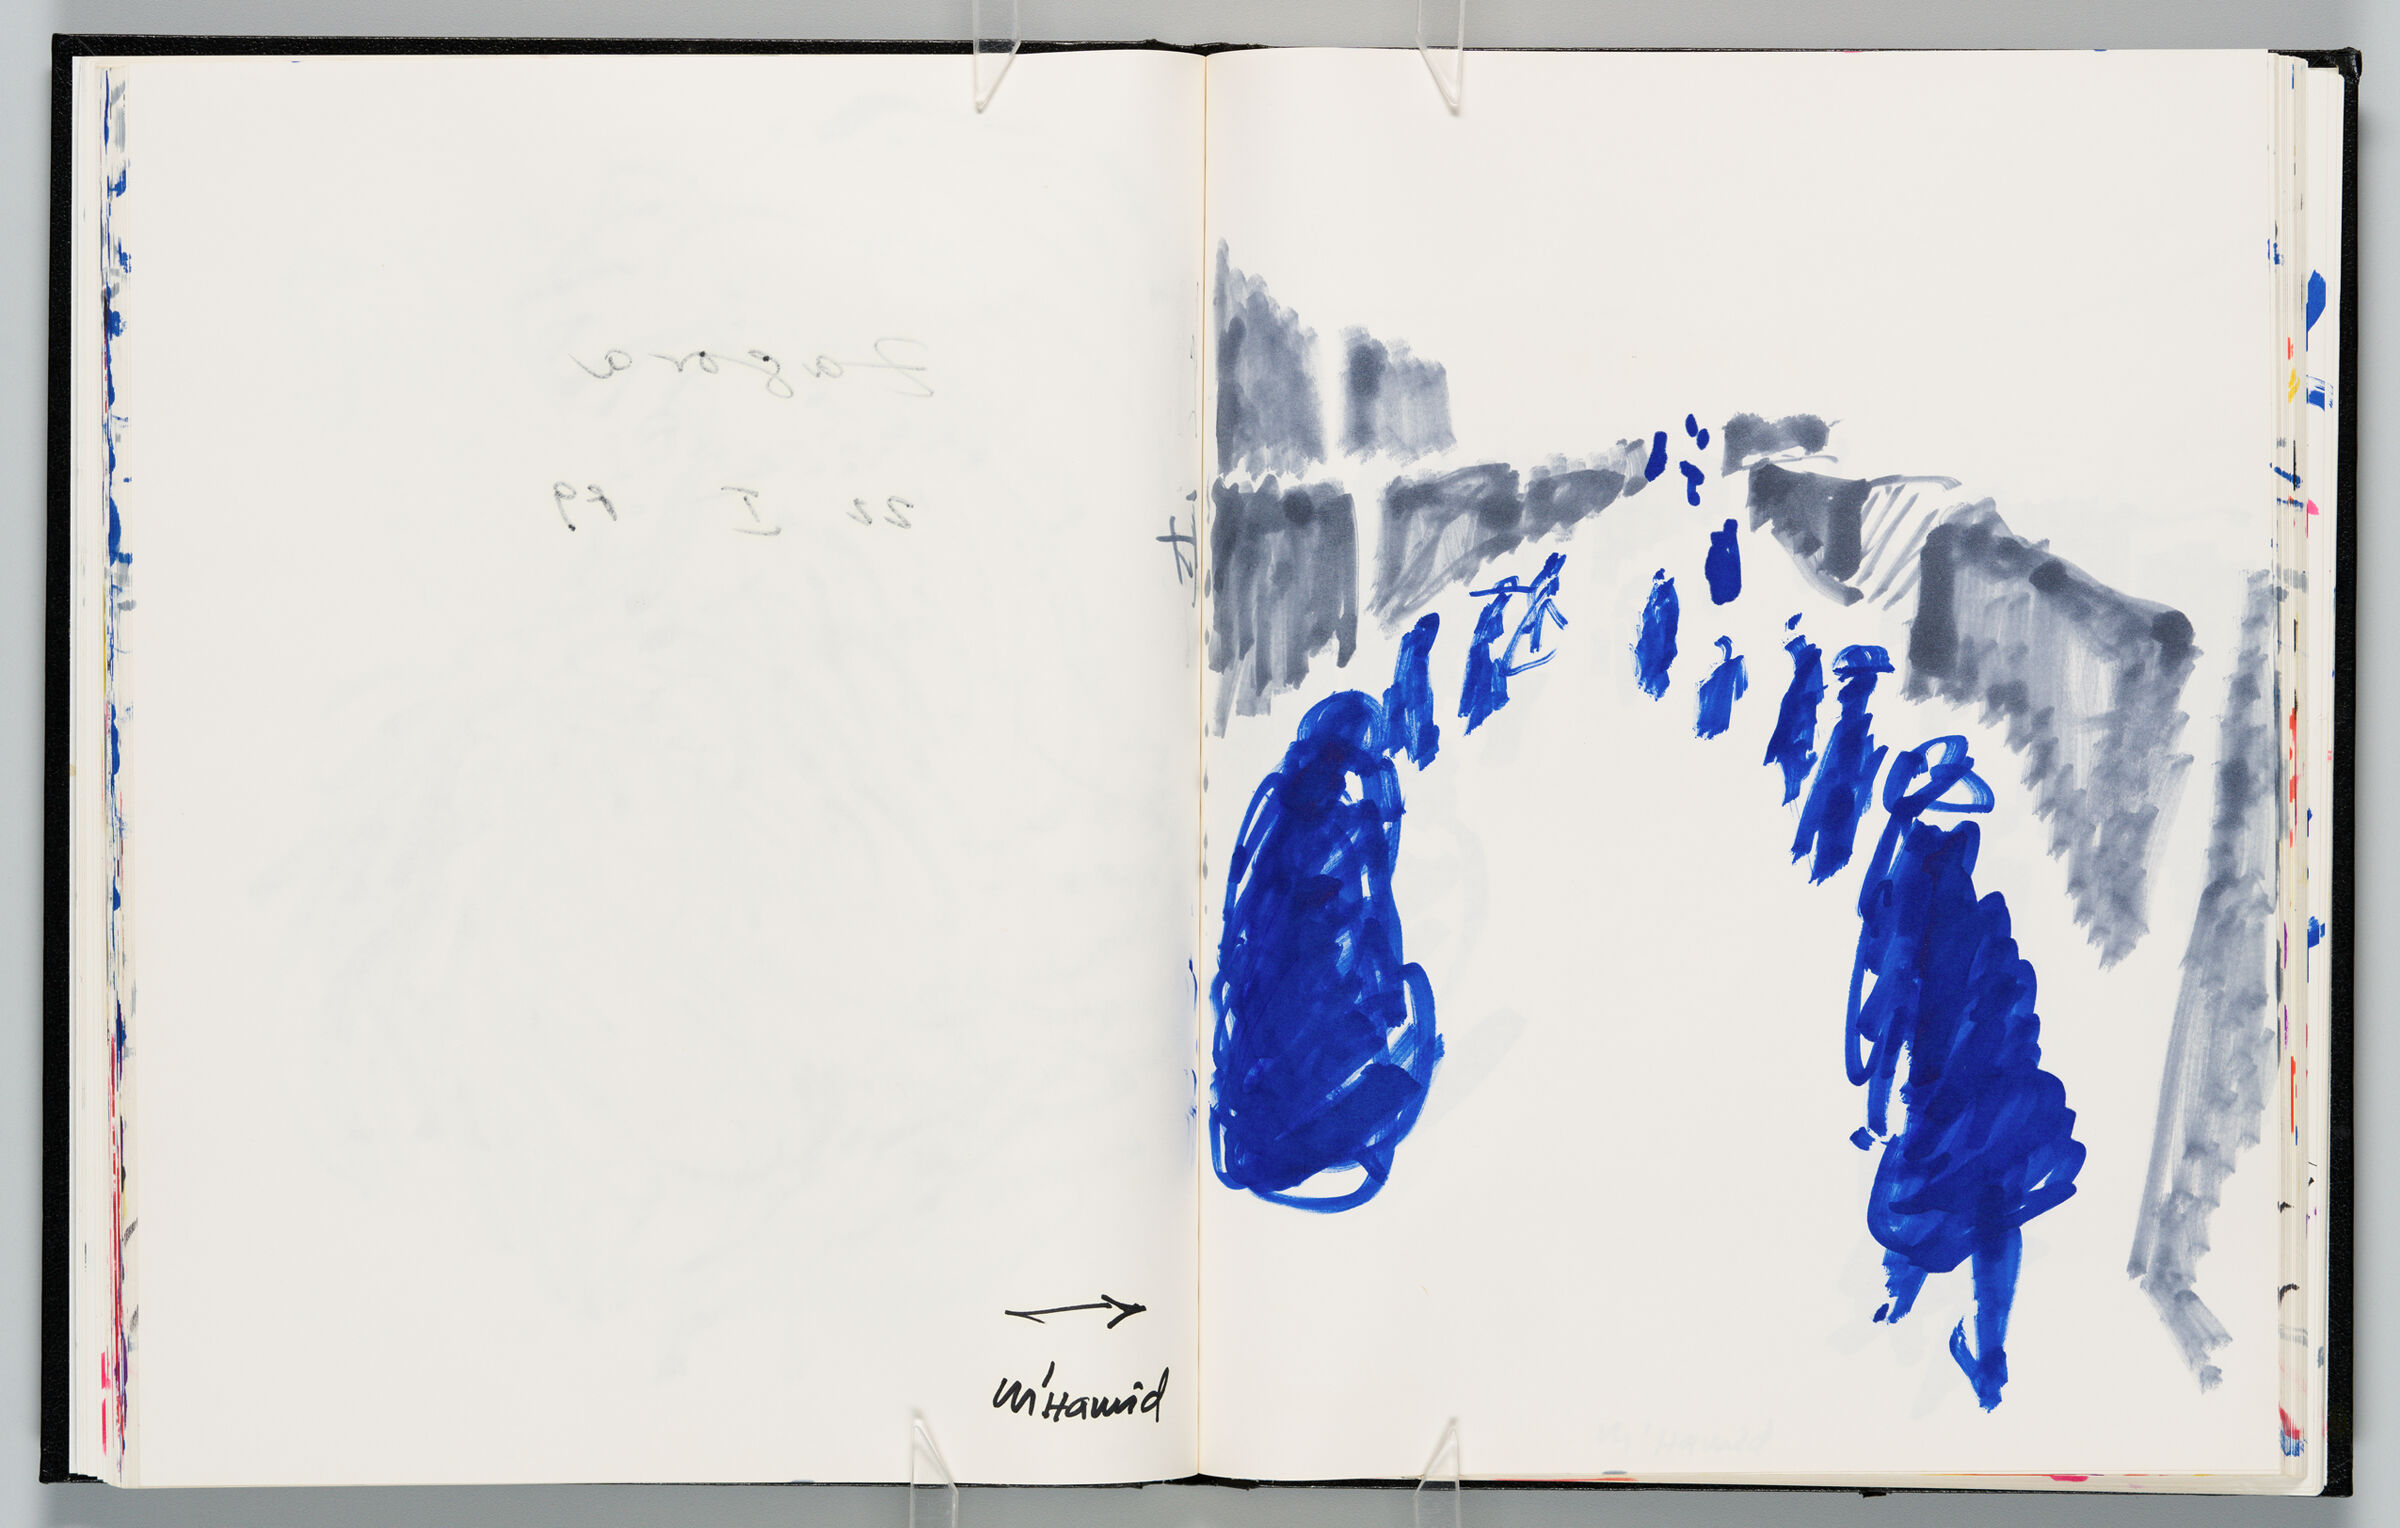 Untitled (Bleed-Through Of Previous Page, Left Page); Untitled (Street Scene With Figures In M'hamid, Right Page)